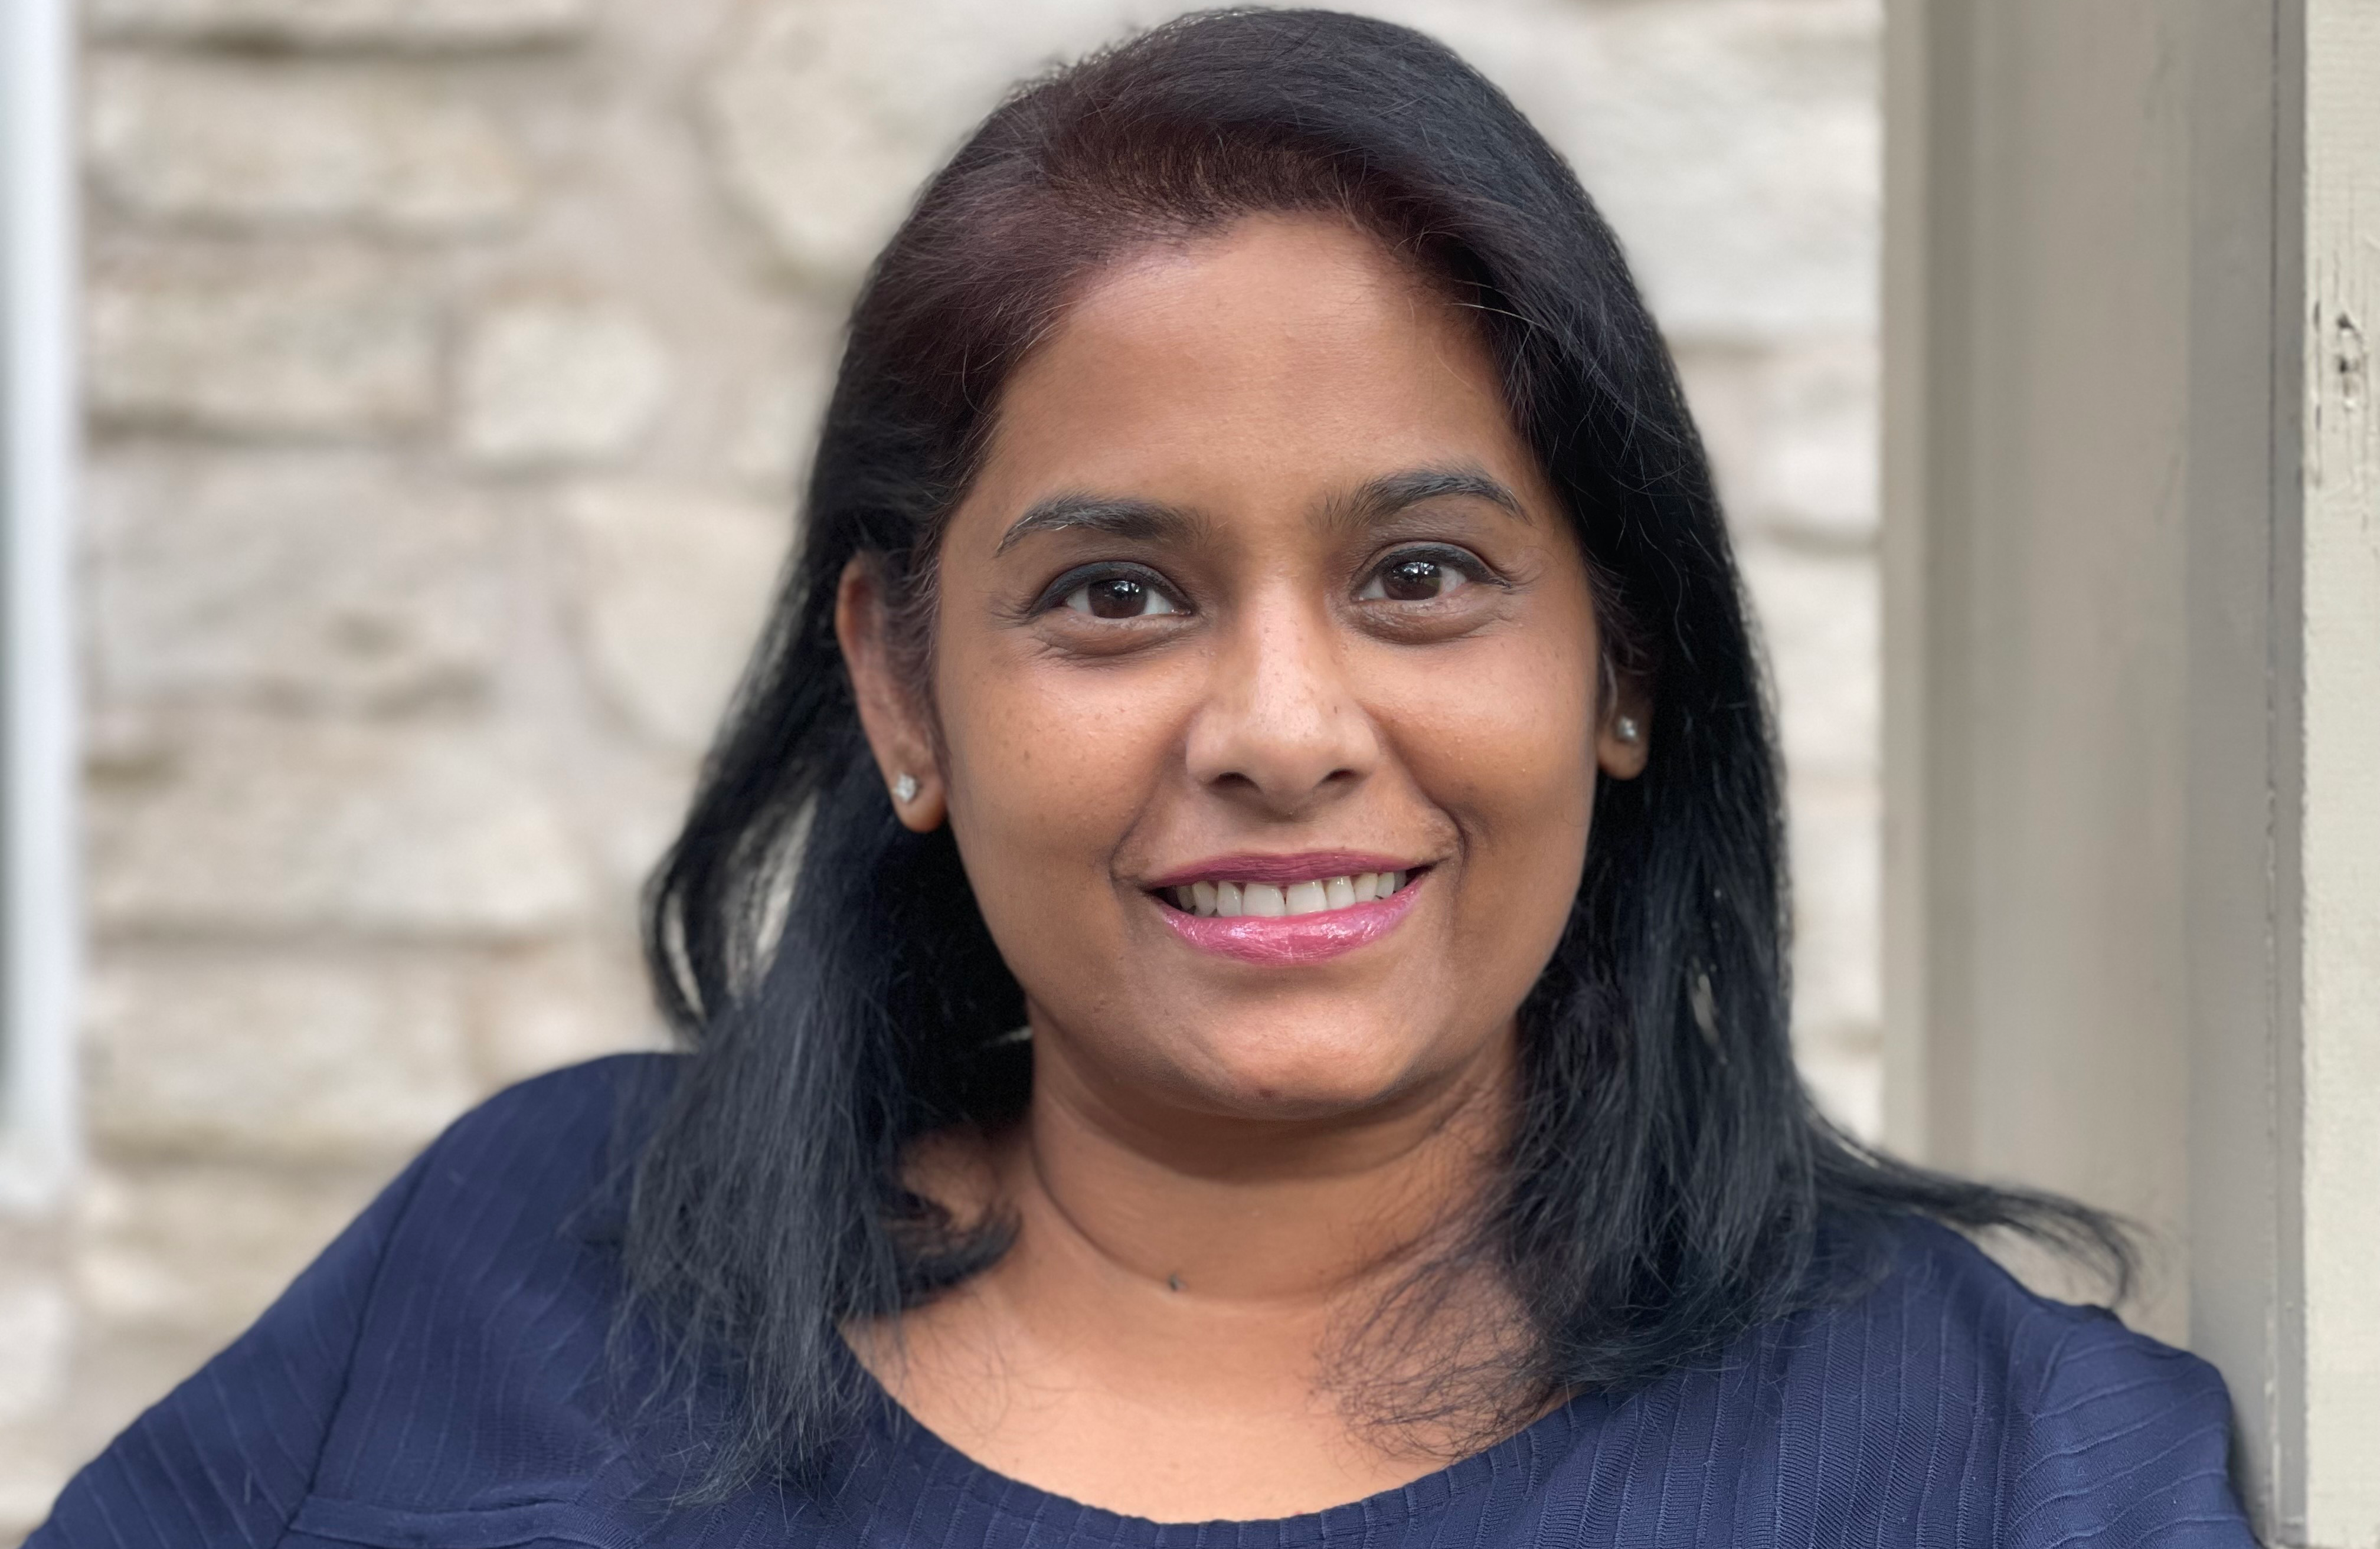 Sujala, a Software Developer who joined IBM through the Tech Re-Entry program